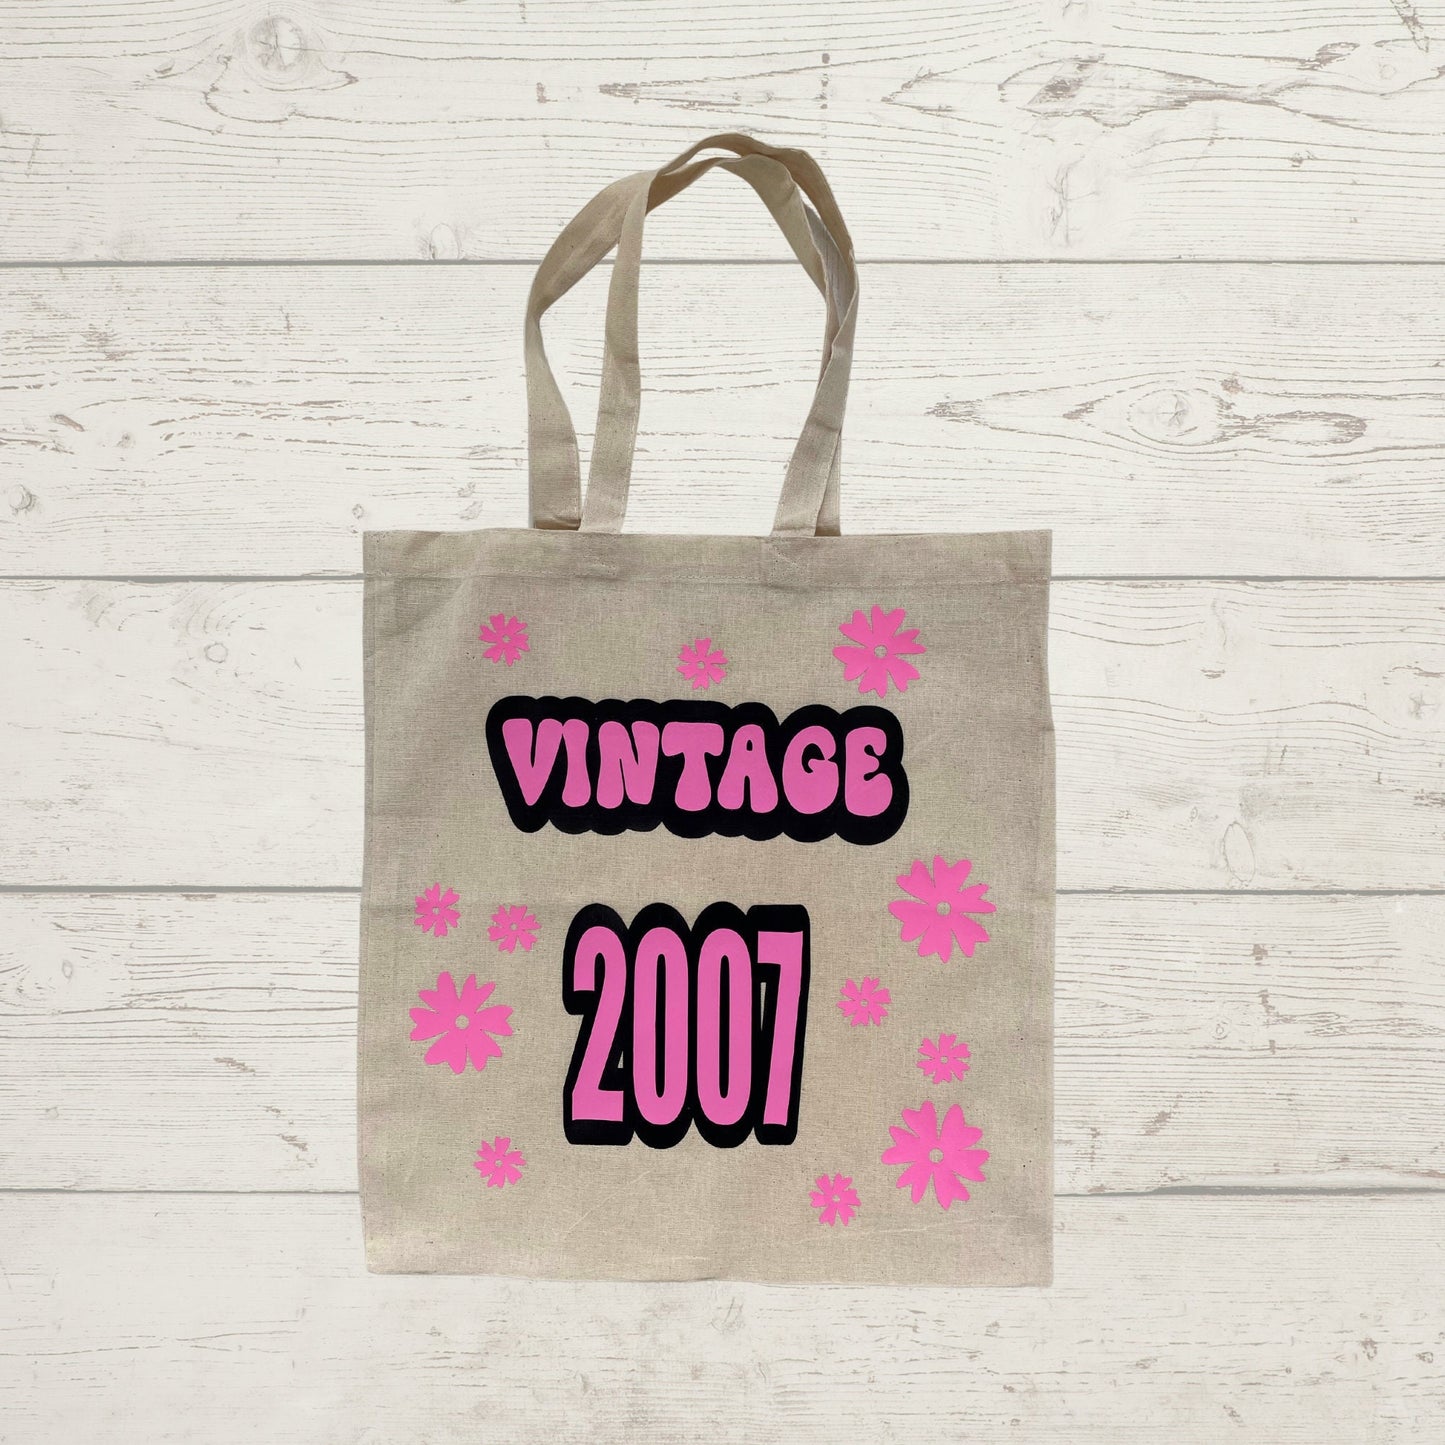 Vintage 2007 Slogan Tote Bag for her, Trendy Gift for Teenager,  Fun Lightweight Cotton Shopper, Birthday Bag Gift for her in Natural Cotton